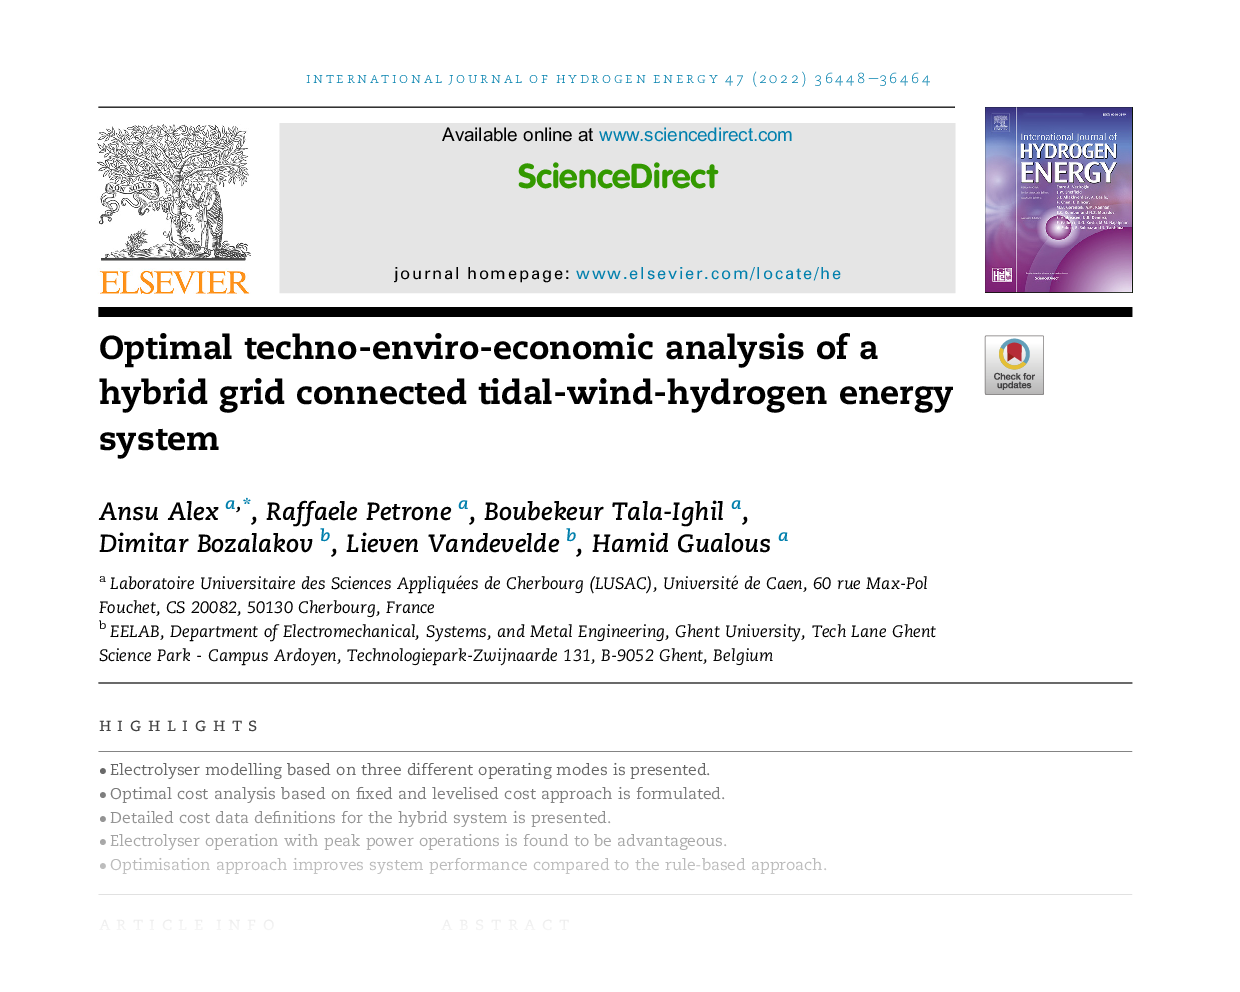 Optimal techno-enviro-economic analysis of a hybrid grid connected tidal-wind-hydrogen energy system